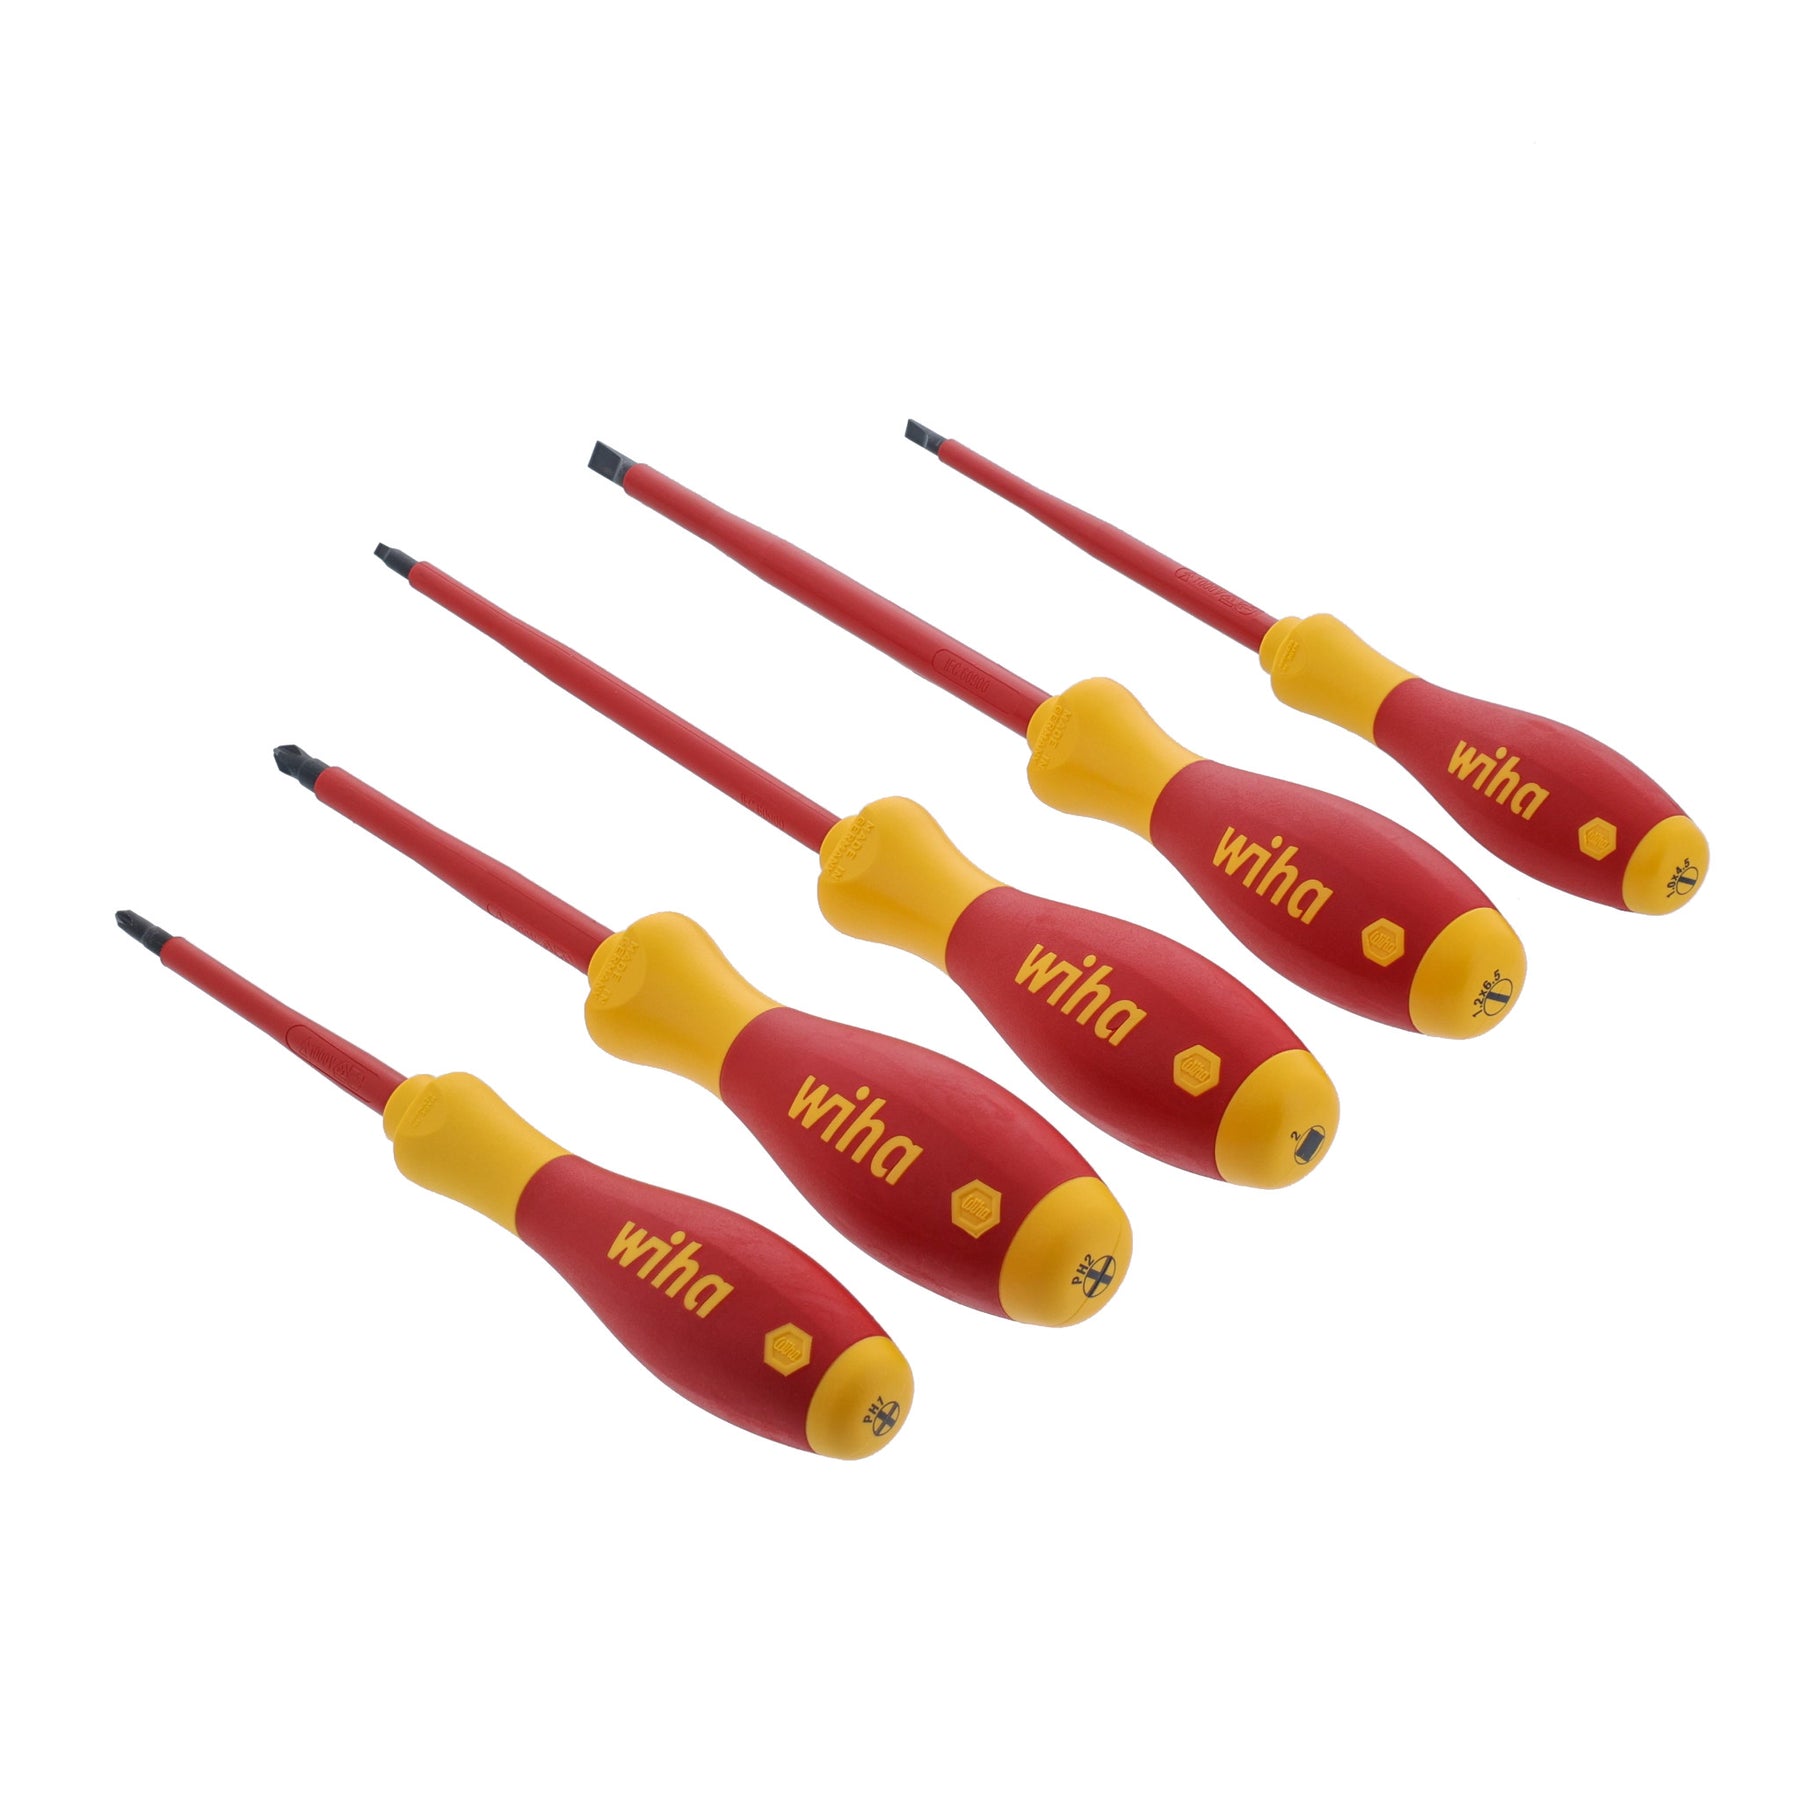 5 Piece Insulated SoftFinish Slotted/Phillips/Square Screwdriver Set